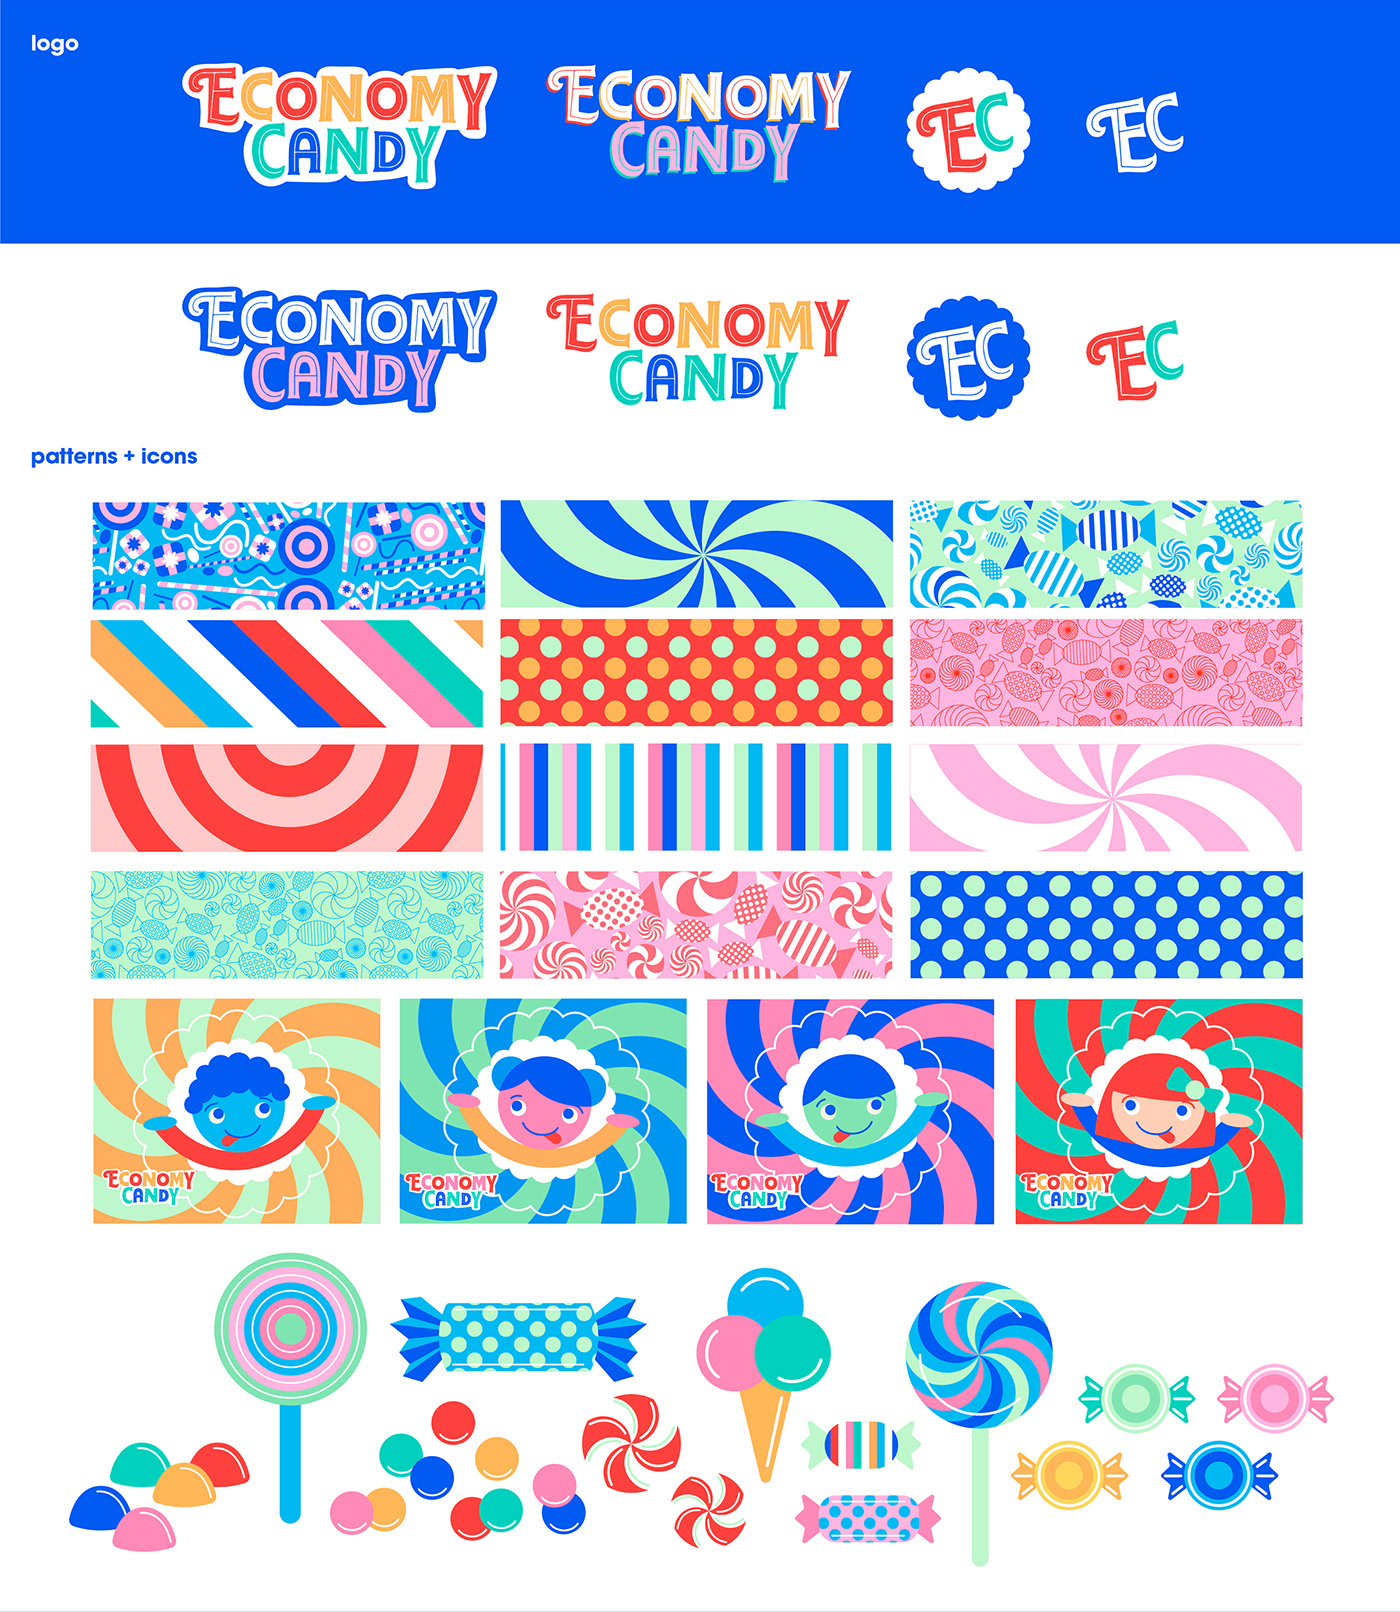 branding  brand identity Candy Packaging bright colorful Fun Business Cards Website